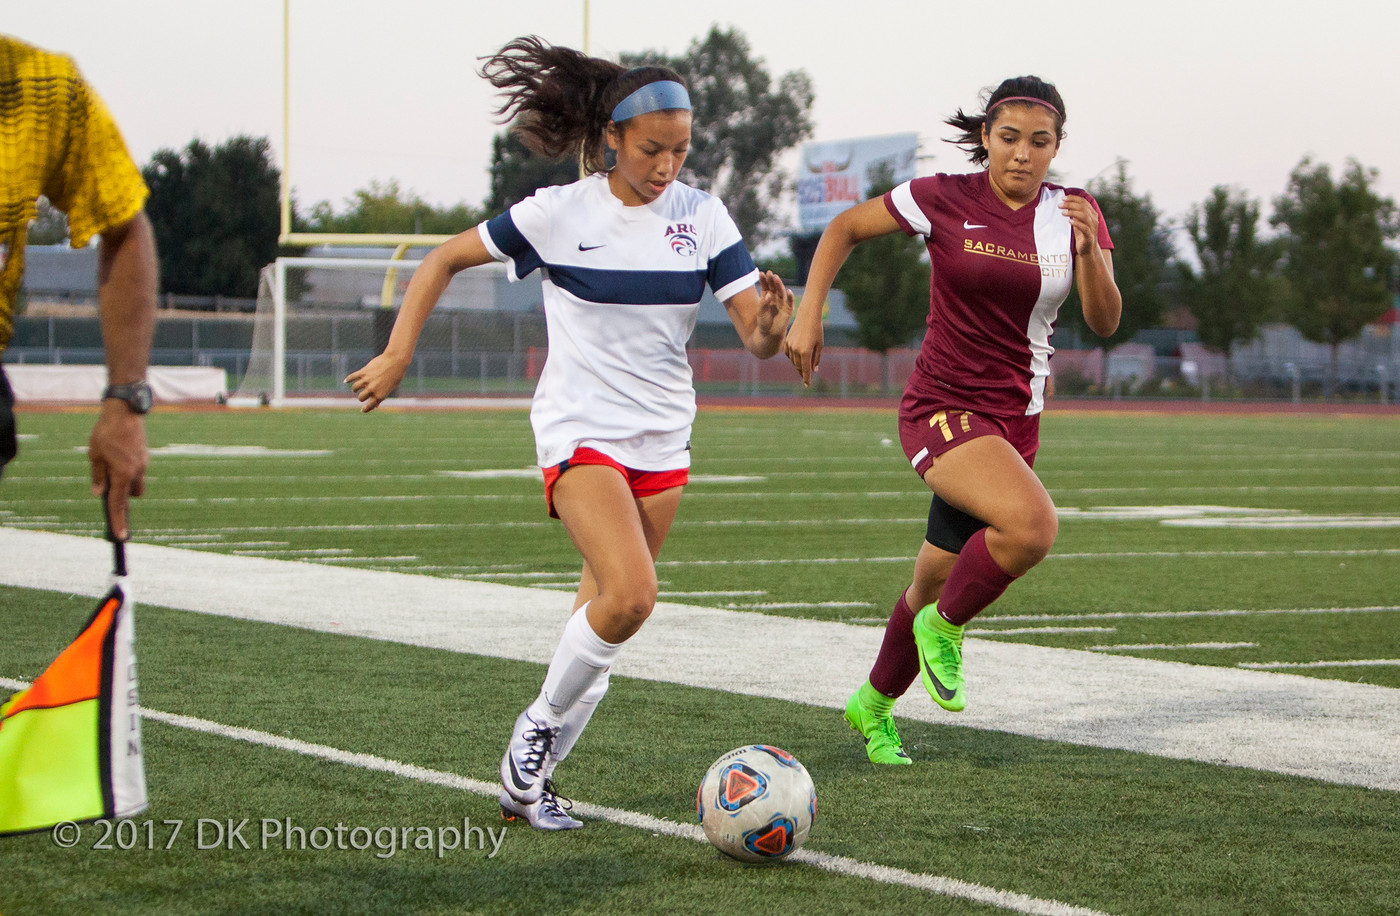 Sierra blanks the Panthers on Tuesday night at Hughes Stadium